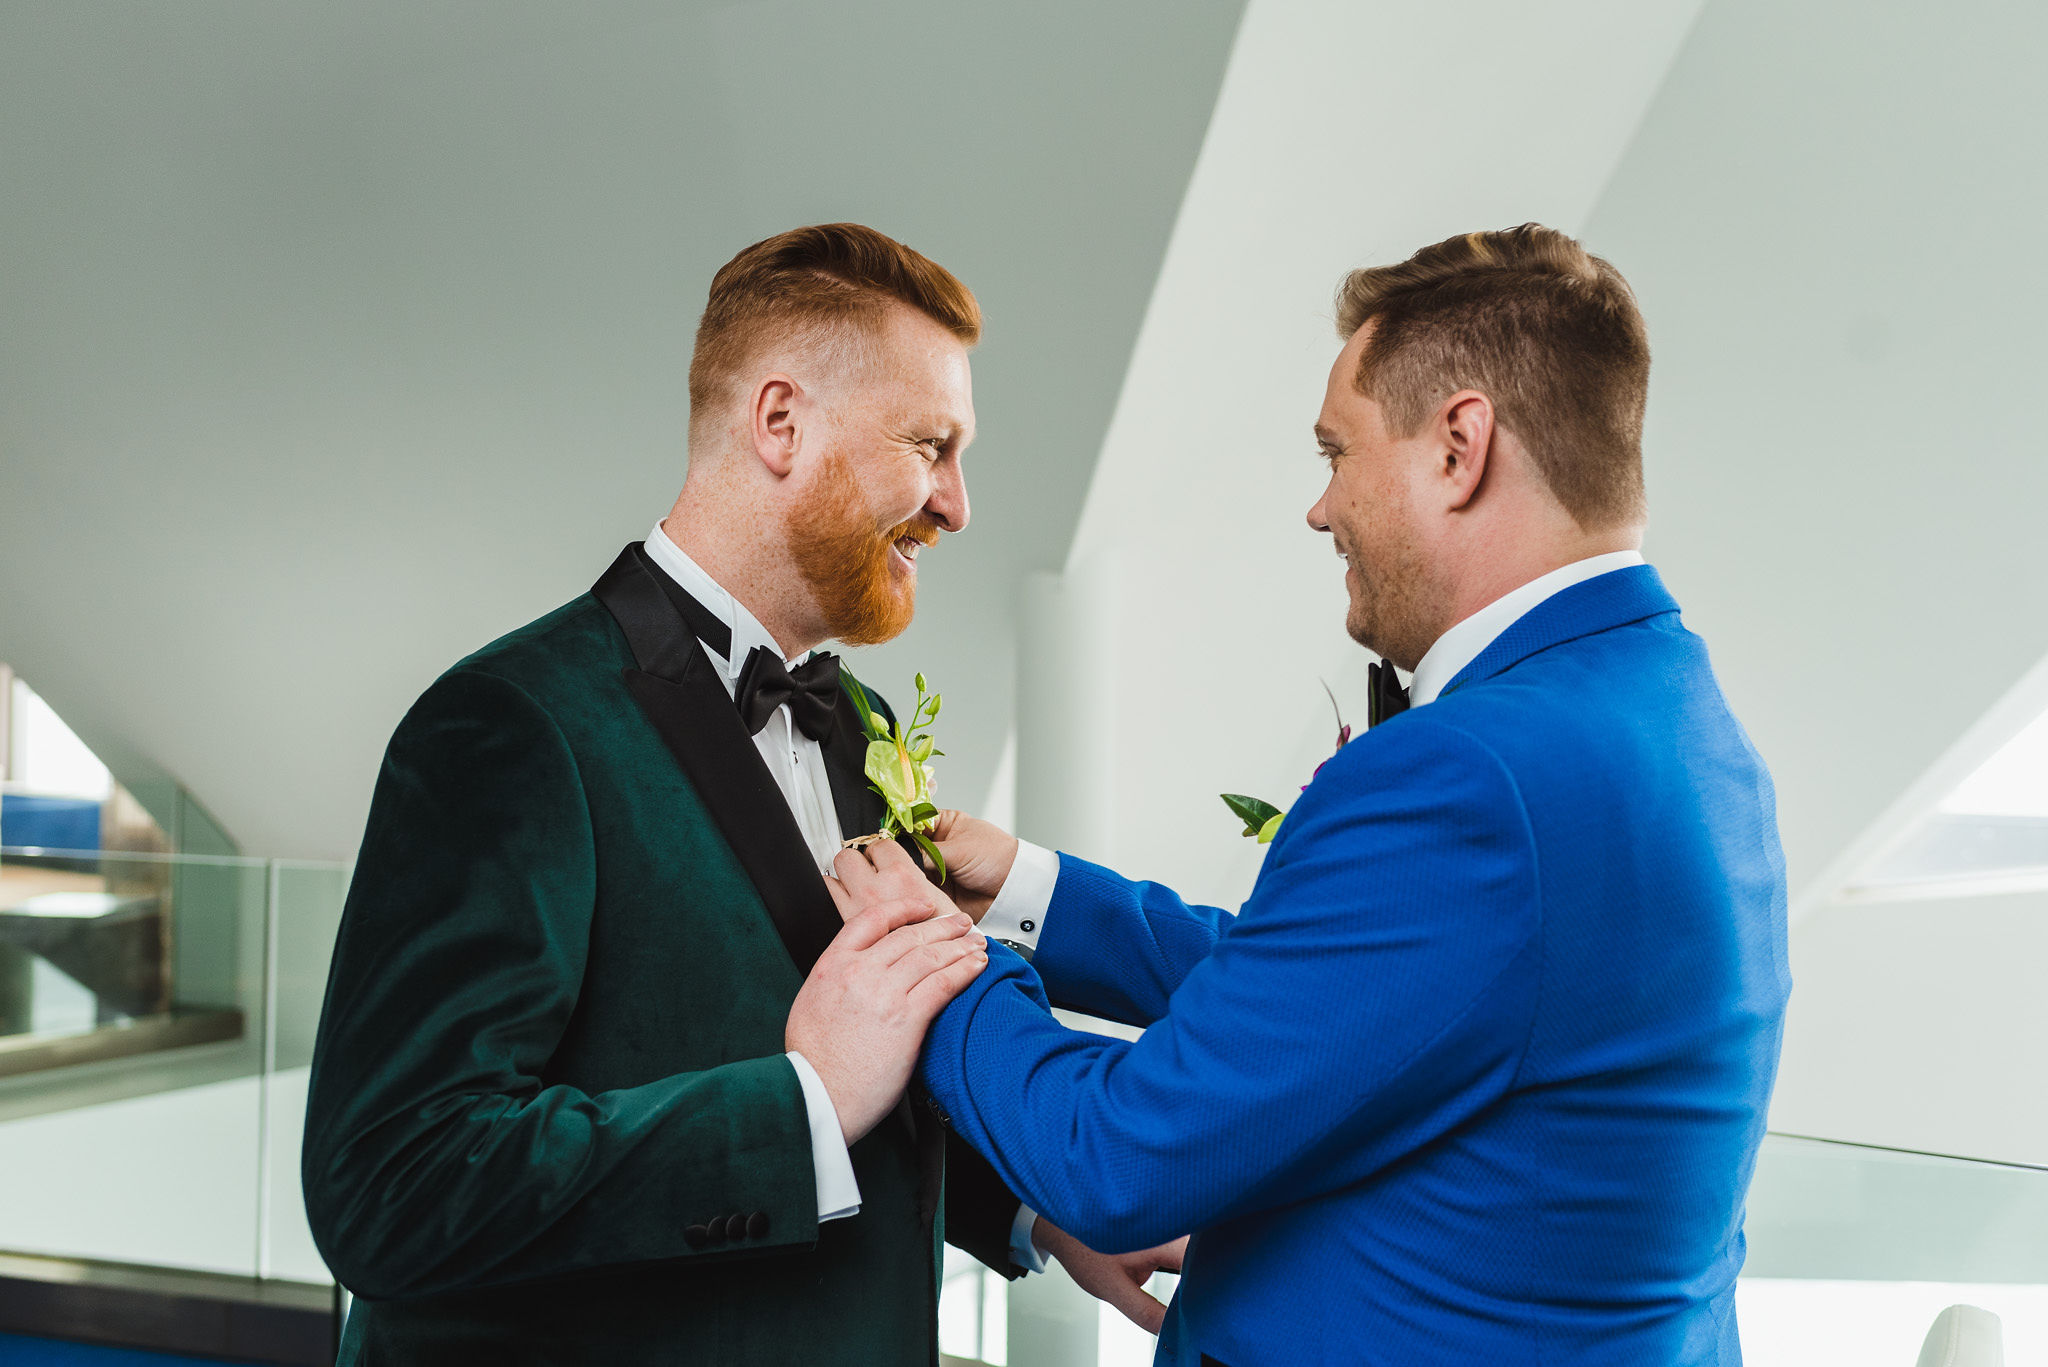 Groom in blue suit placing boutonniere on lapel of groom in green suit before their wedding at the Hilton in Niagara Falls 